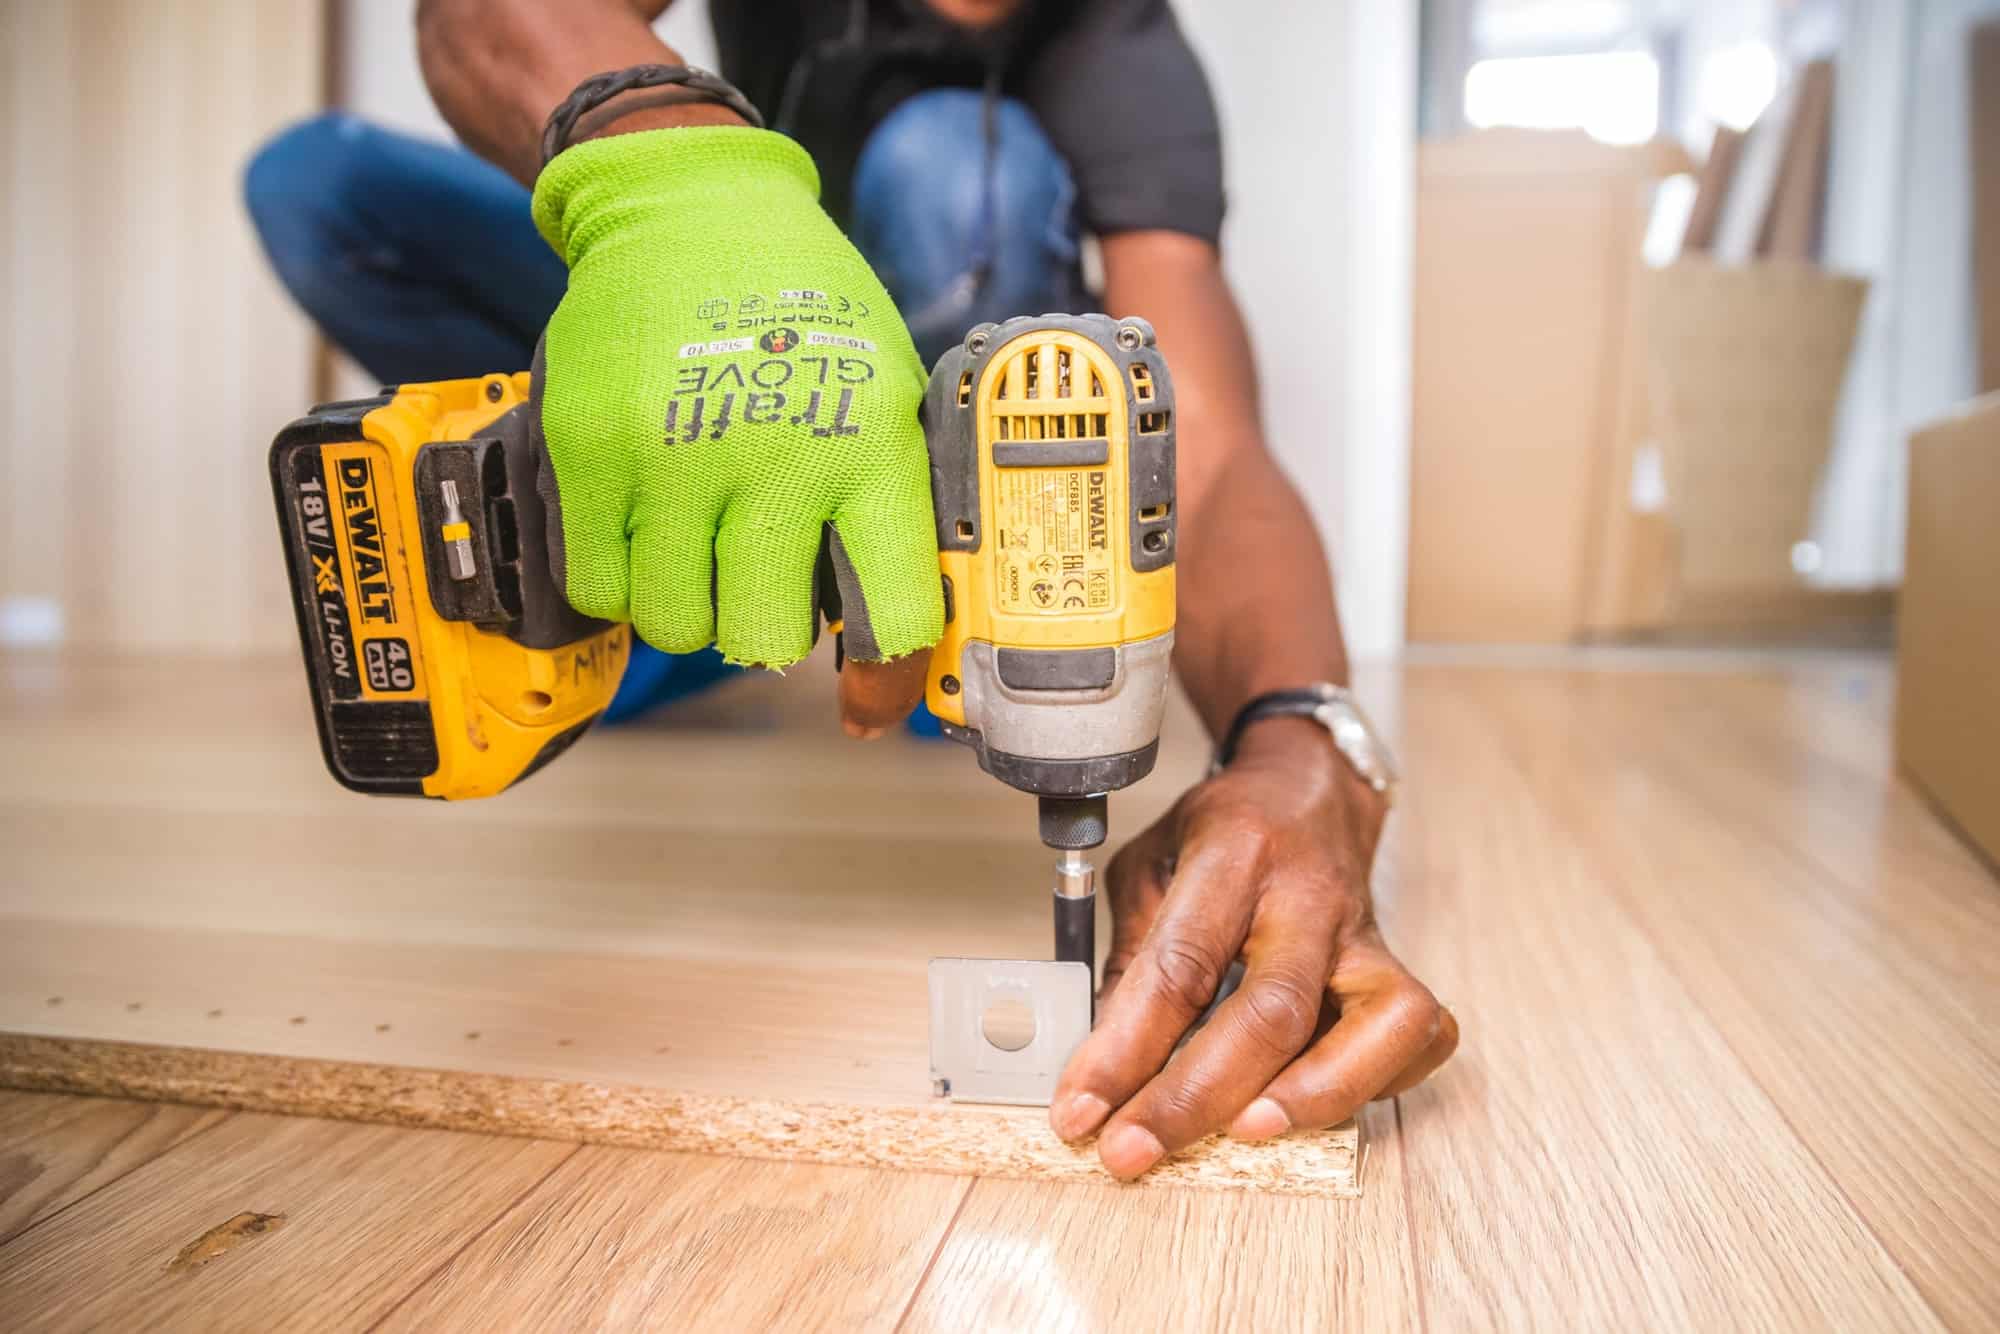 How to Start a Carpentry Business